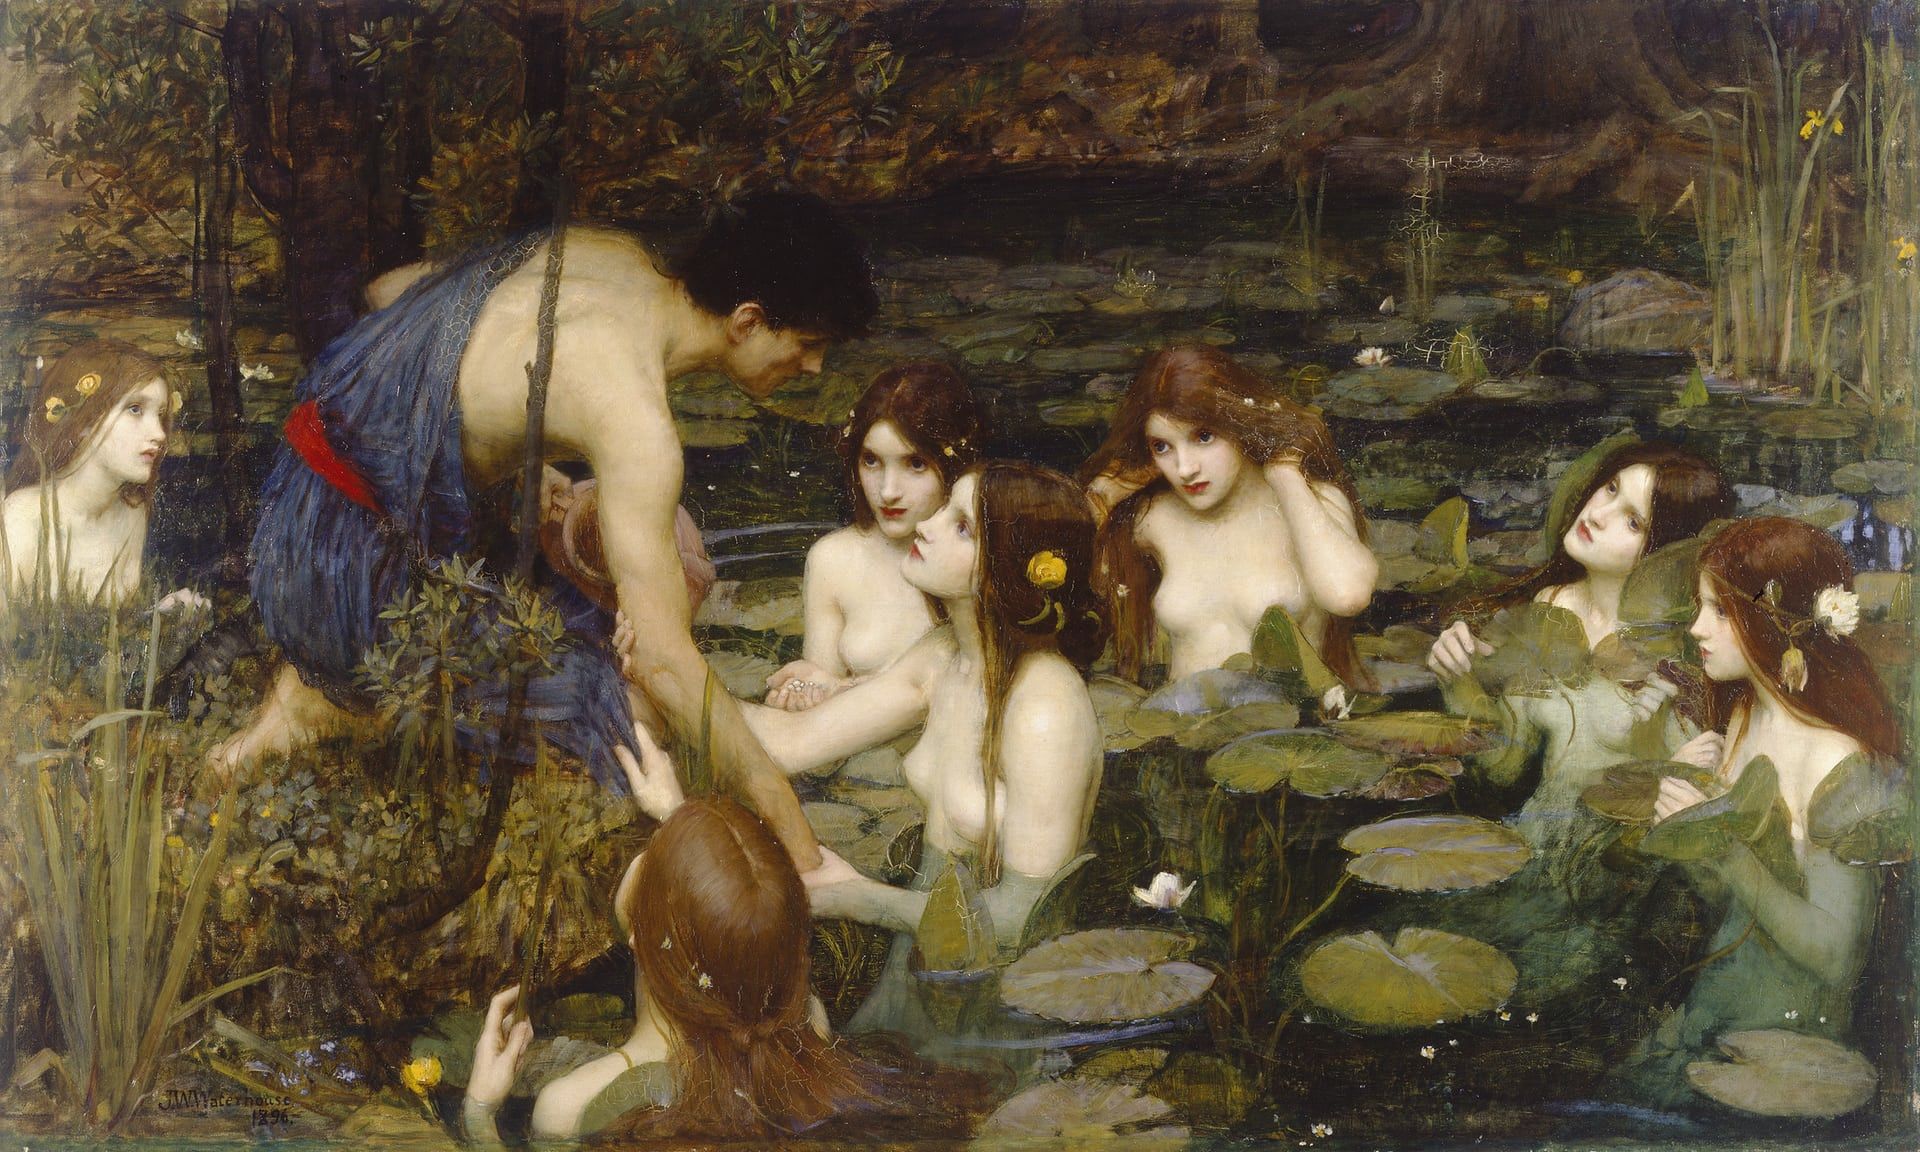 Hylas and the Nymphs (1896) by John William Waterhouse Photo: Courtesy of Manchester City Galleries